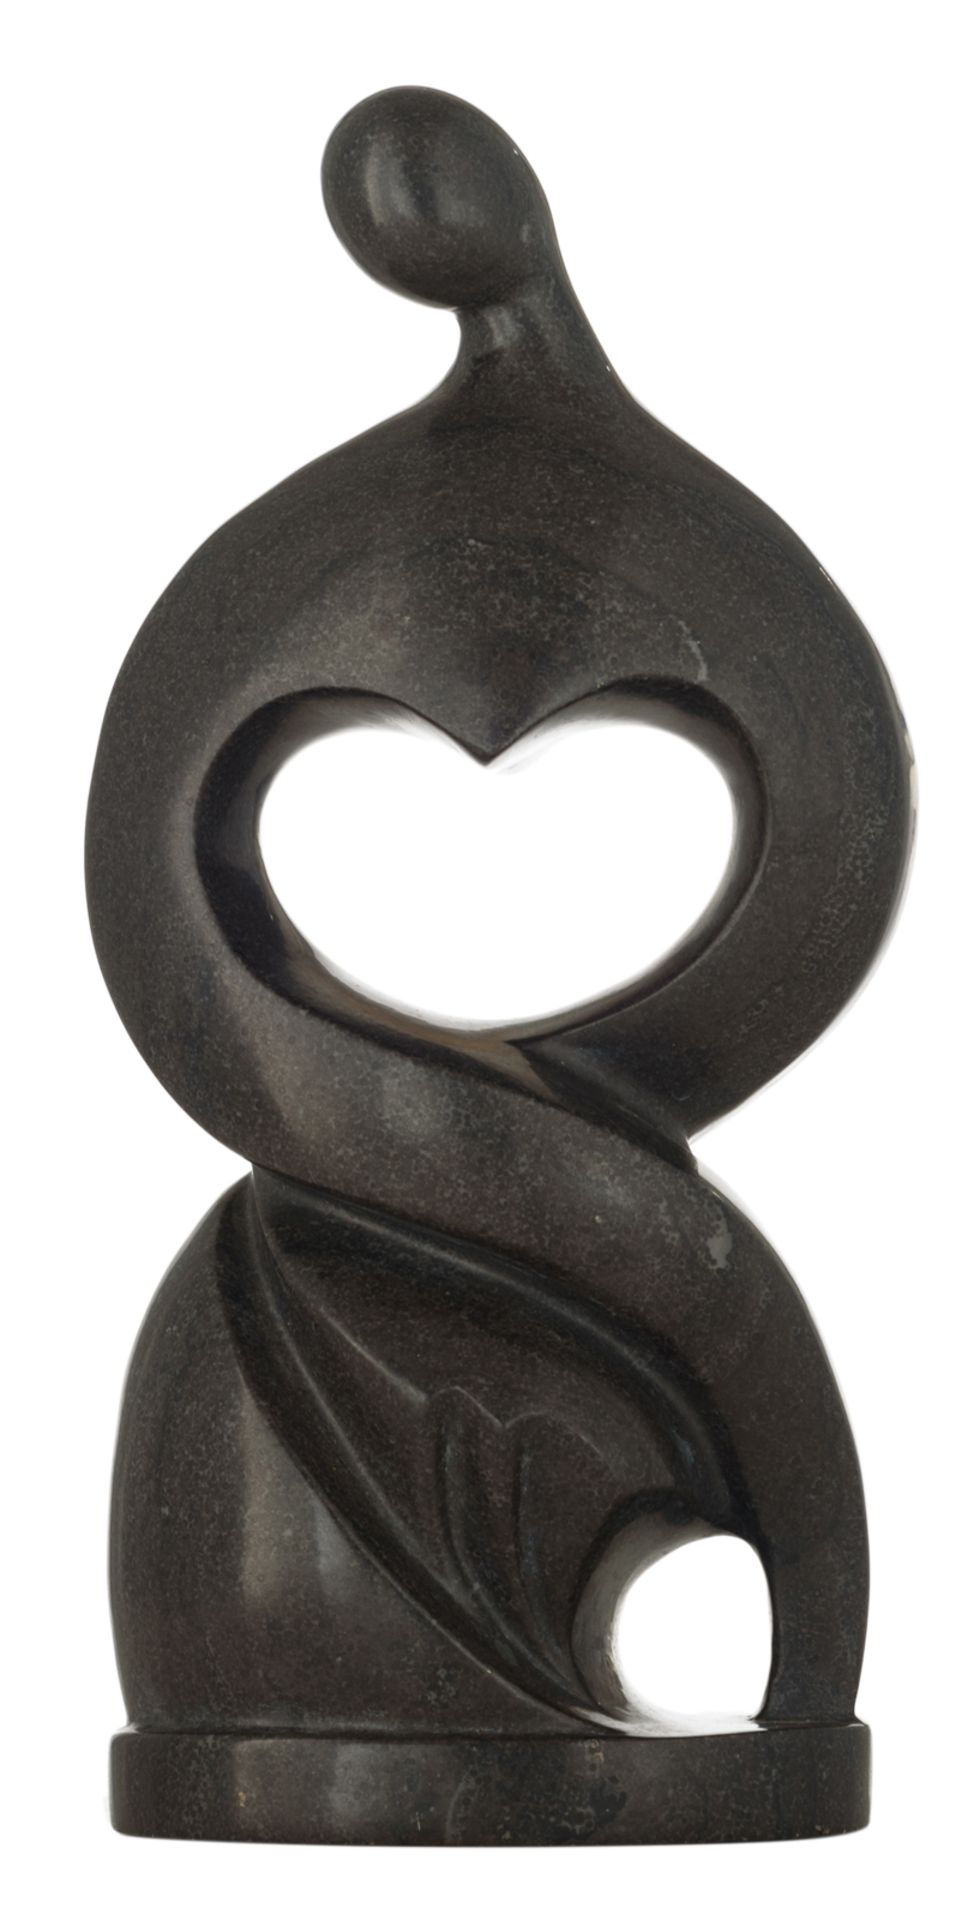 No visible signature, an abstract sculpture in the manner of Henry Moore, black granite, H 26,5 cm